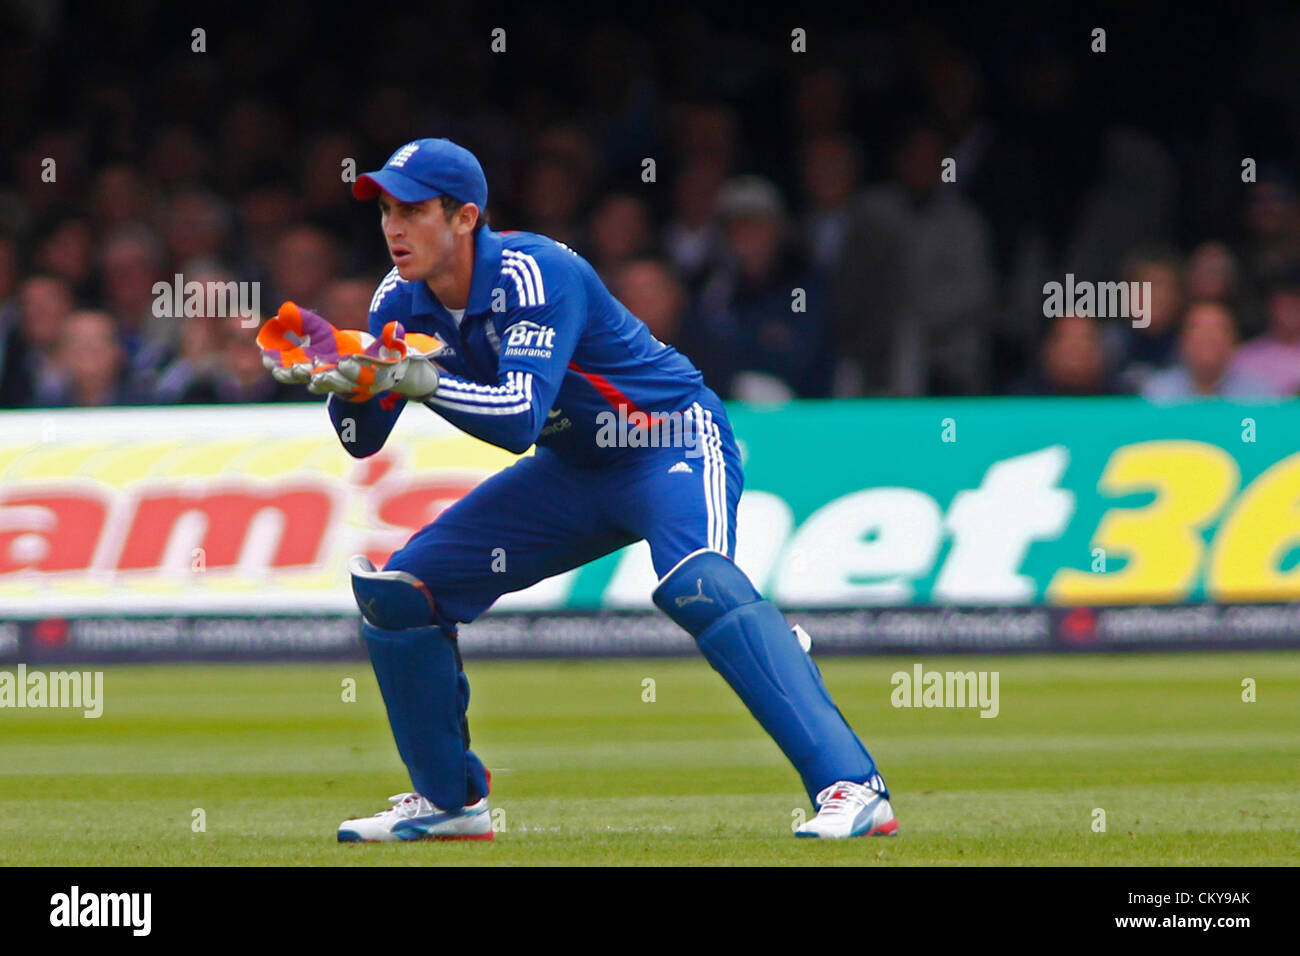 02/09/2012 London, England. England's Craig Kieswetter  during the 3rd Nat West one day international cricket match between  England and South Africa and played at Lords Cricket Ground: Mandatory credit: Mitchell Gunn Stock Photo